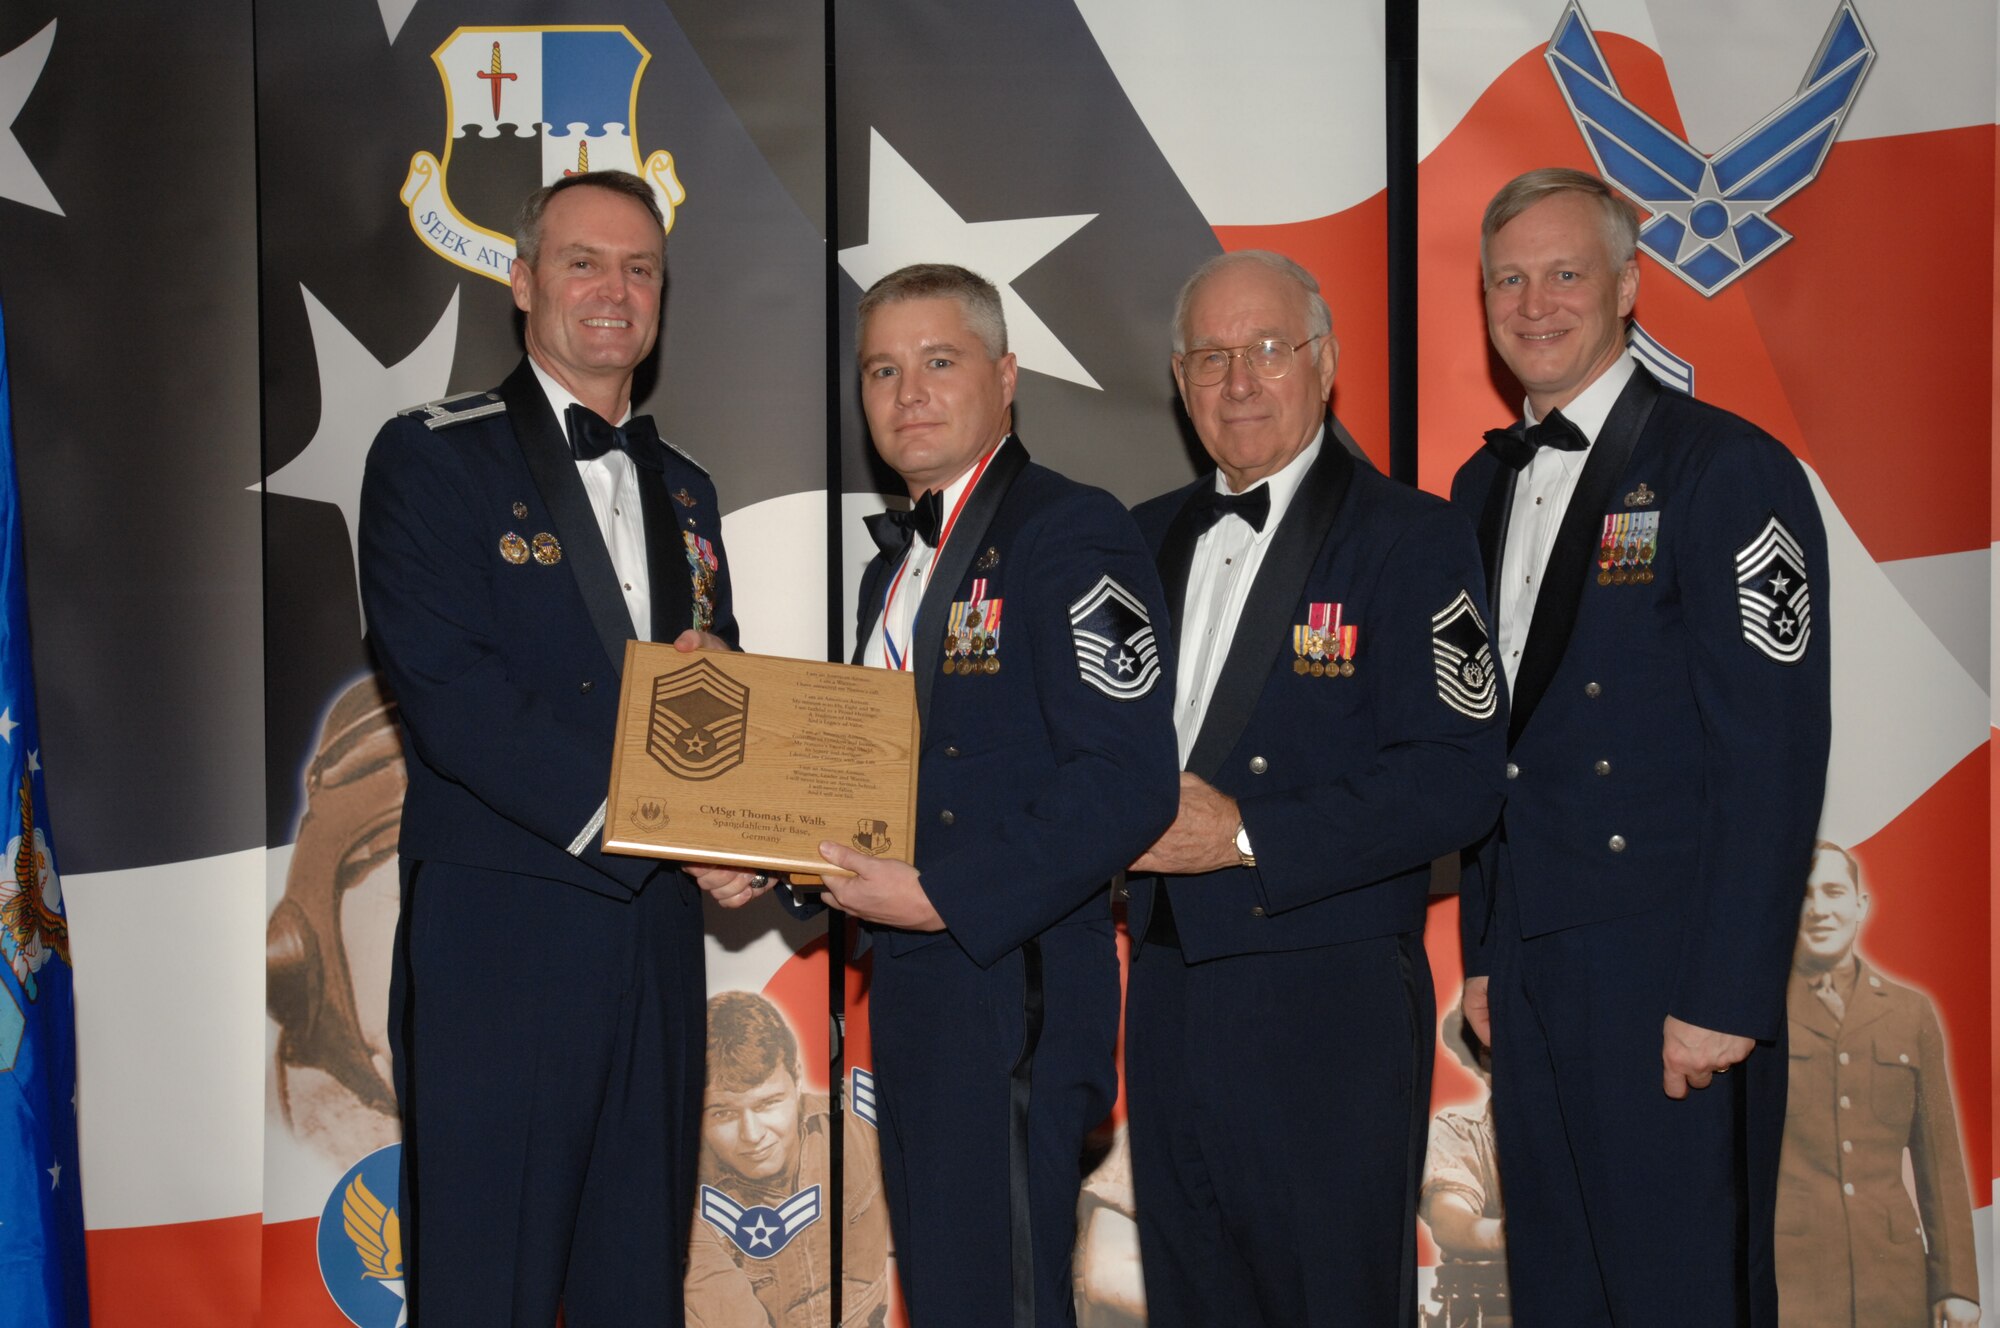 SPANGDAHLEM AIR BASE, Germany – Senior Master Sgt. Thomas Walls, 52nd Logistics Readiness Squadron, receives a plaque from Col. Darryl Roberson, 52nd Fighter Wing commander, Jan. 19, 2008 at Club Eifel. The plaque recognizes him as new chief master sergeant select. Sergeant Walls was also congratulated by retired Chief Master Sgt. of the Air Force Sam Parish and Chief Master Sgt. Vance Clarke, 52nd FW command chief. (U.S. Air Force photo/Airman 1st Class Jenifer Calhoun)